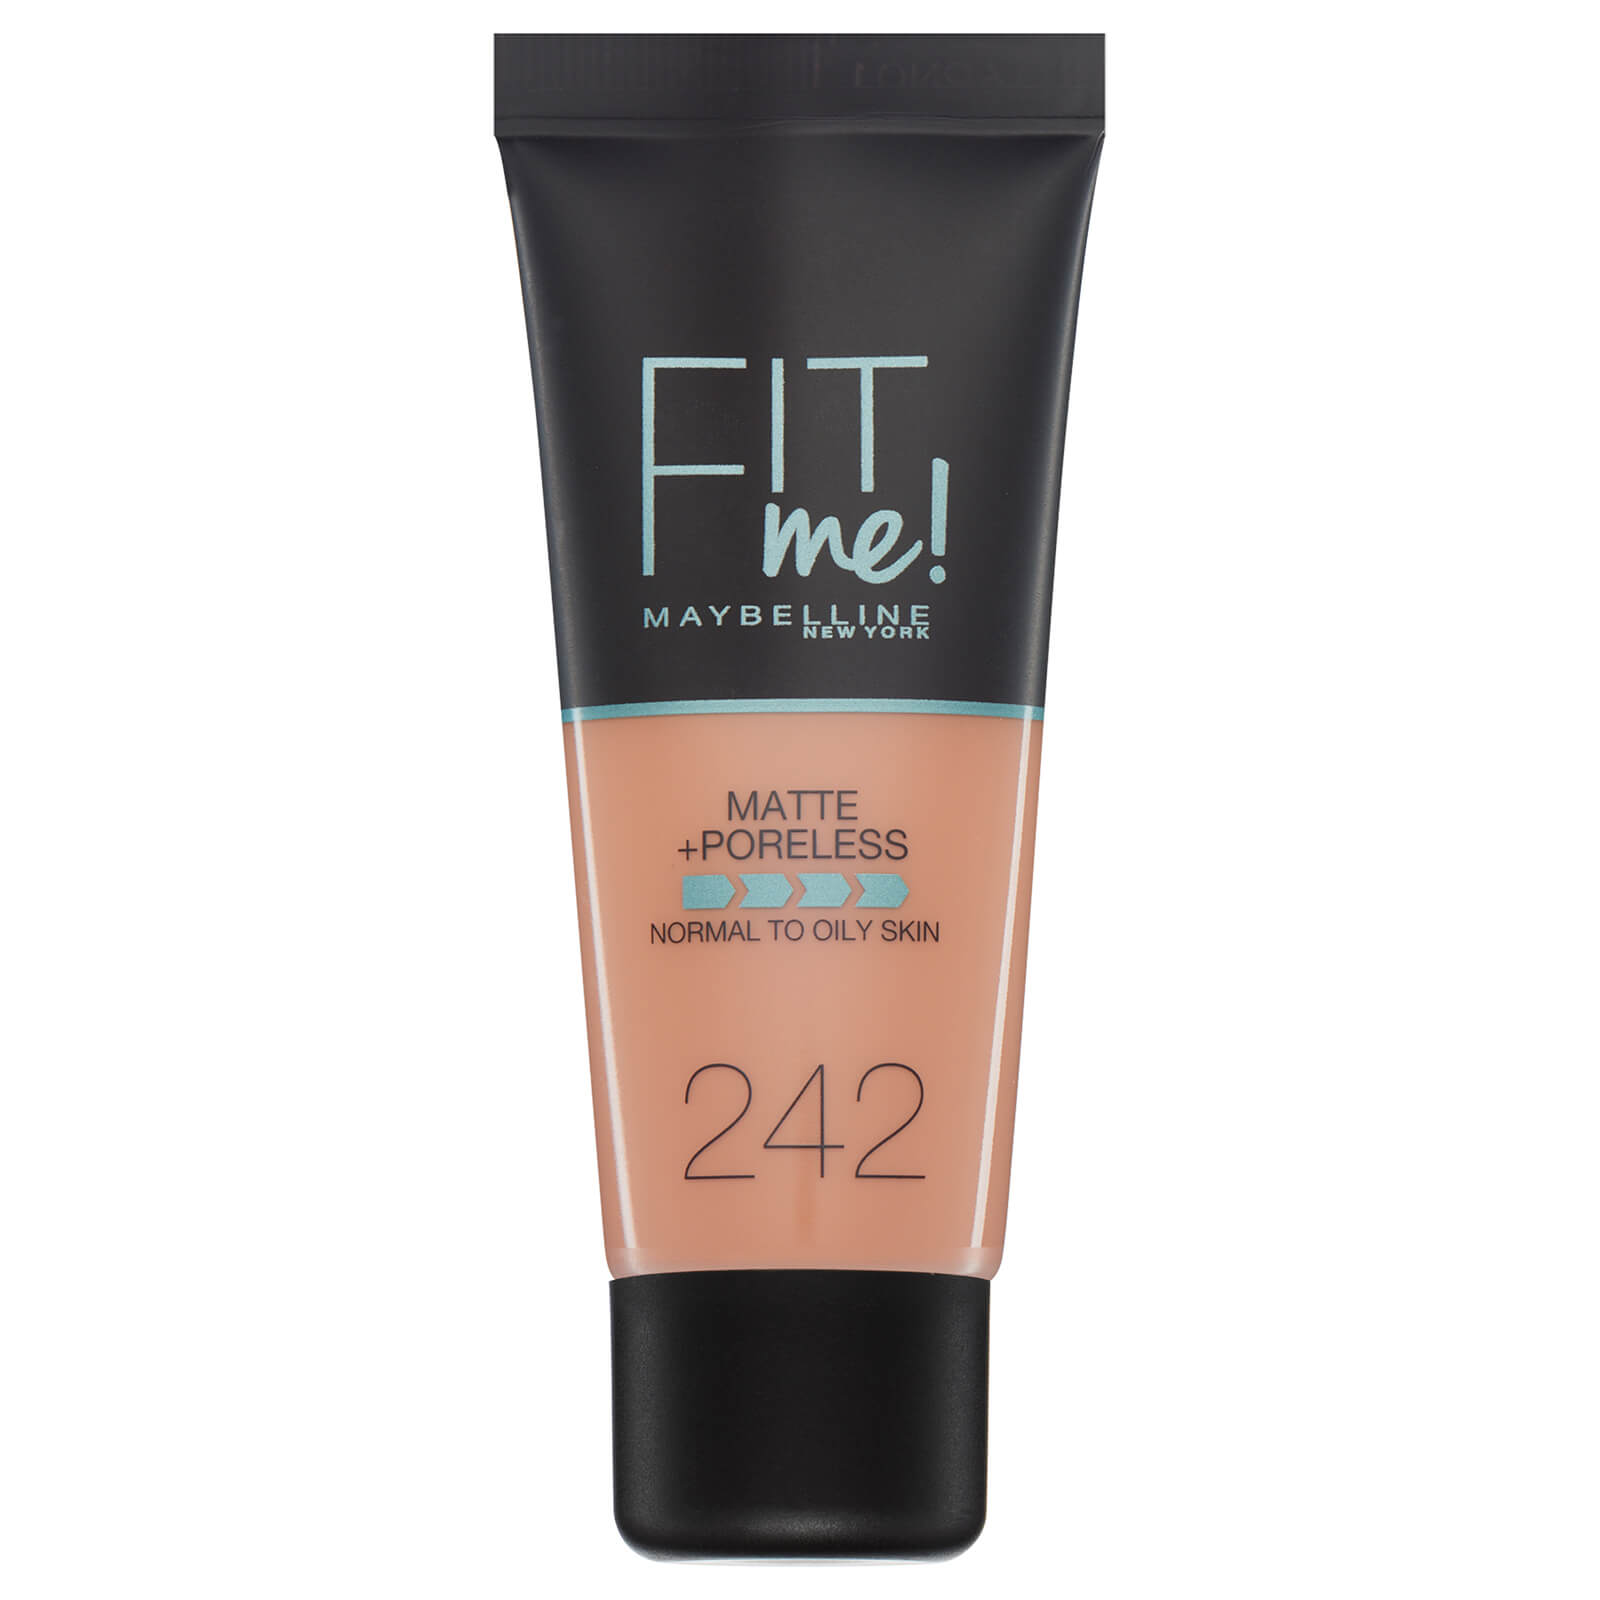 Maybelline Fit Me! Matte and Poreless Foundation 30ml (Various Shades) - 22 242 Light Honey